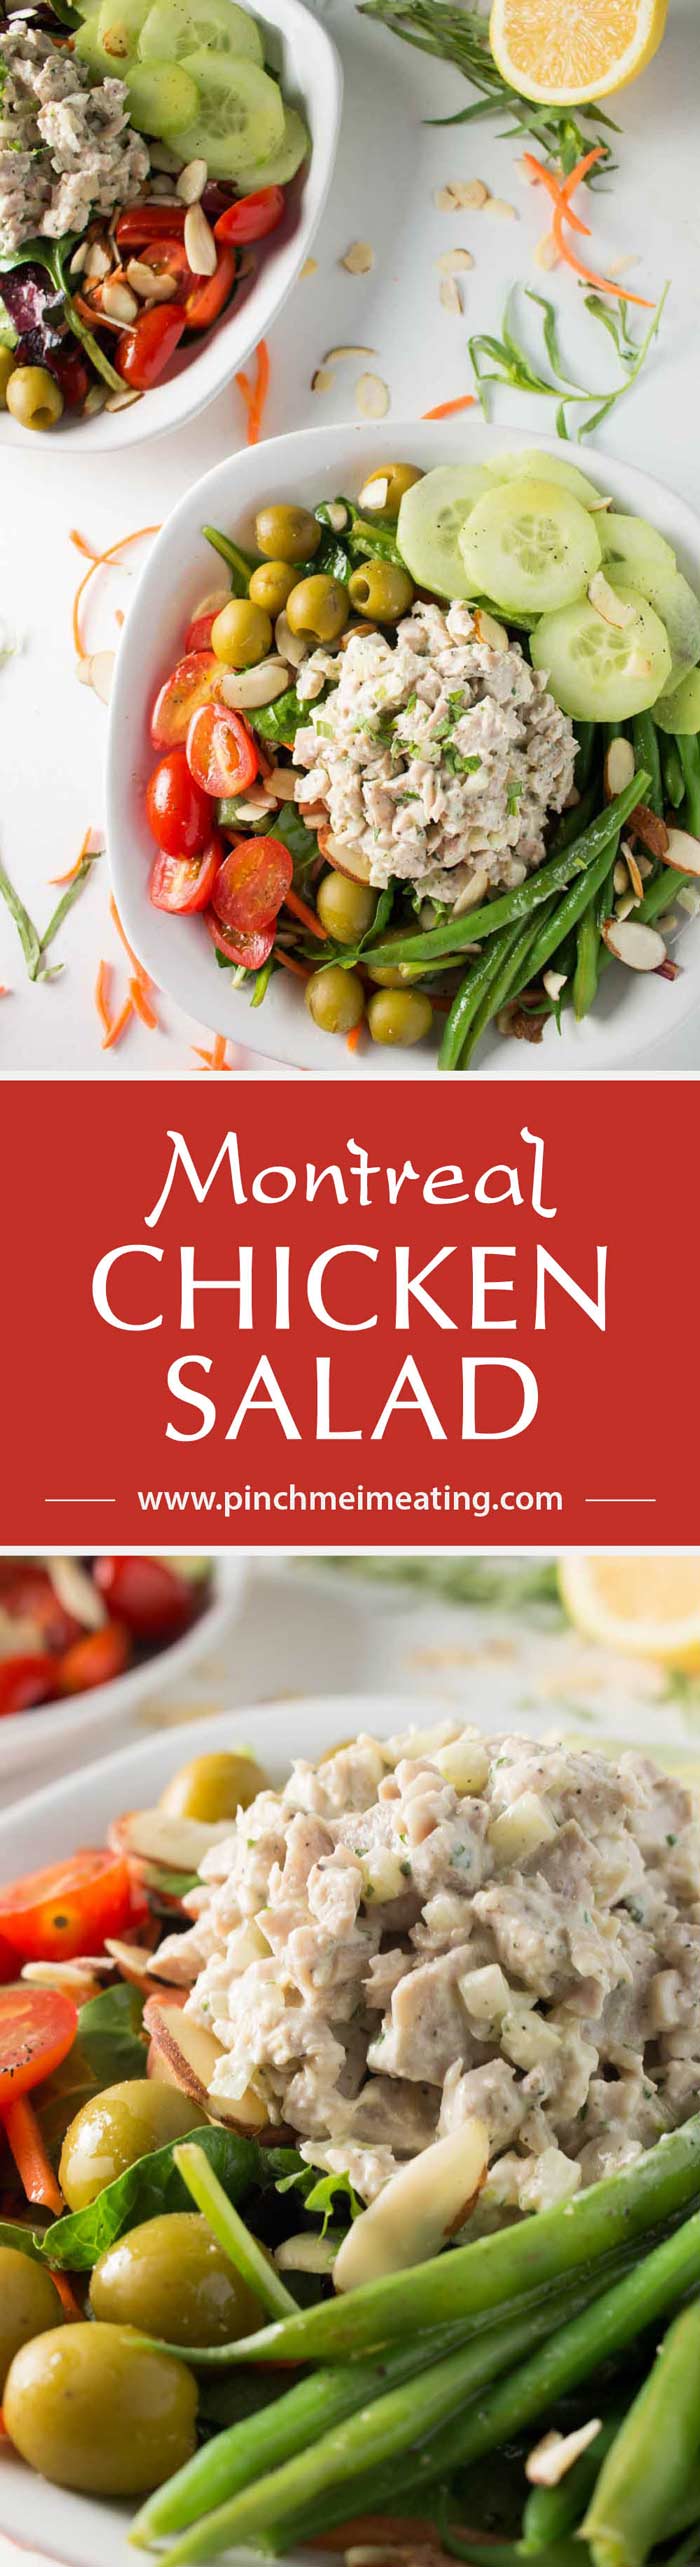 Inspired by a salad from the historic district of Old Montreal, this dinner salad is light, fresh, and perfect for dining al fresco at your own home! Topped with lemon tarragon chicken salad and a champagne vinaigrette. | www.pinchmeimeating.com